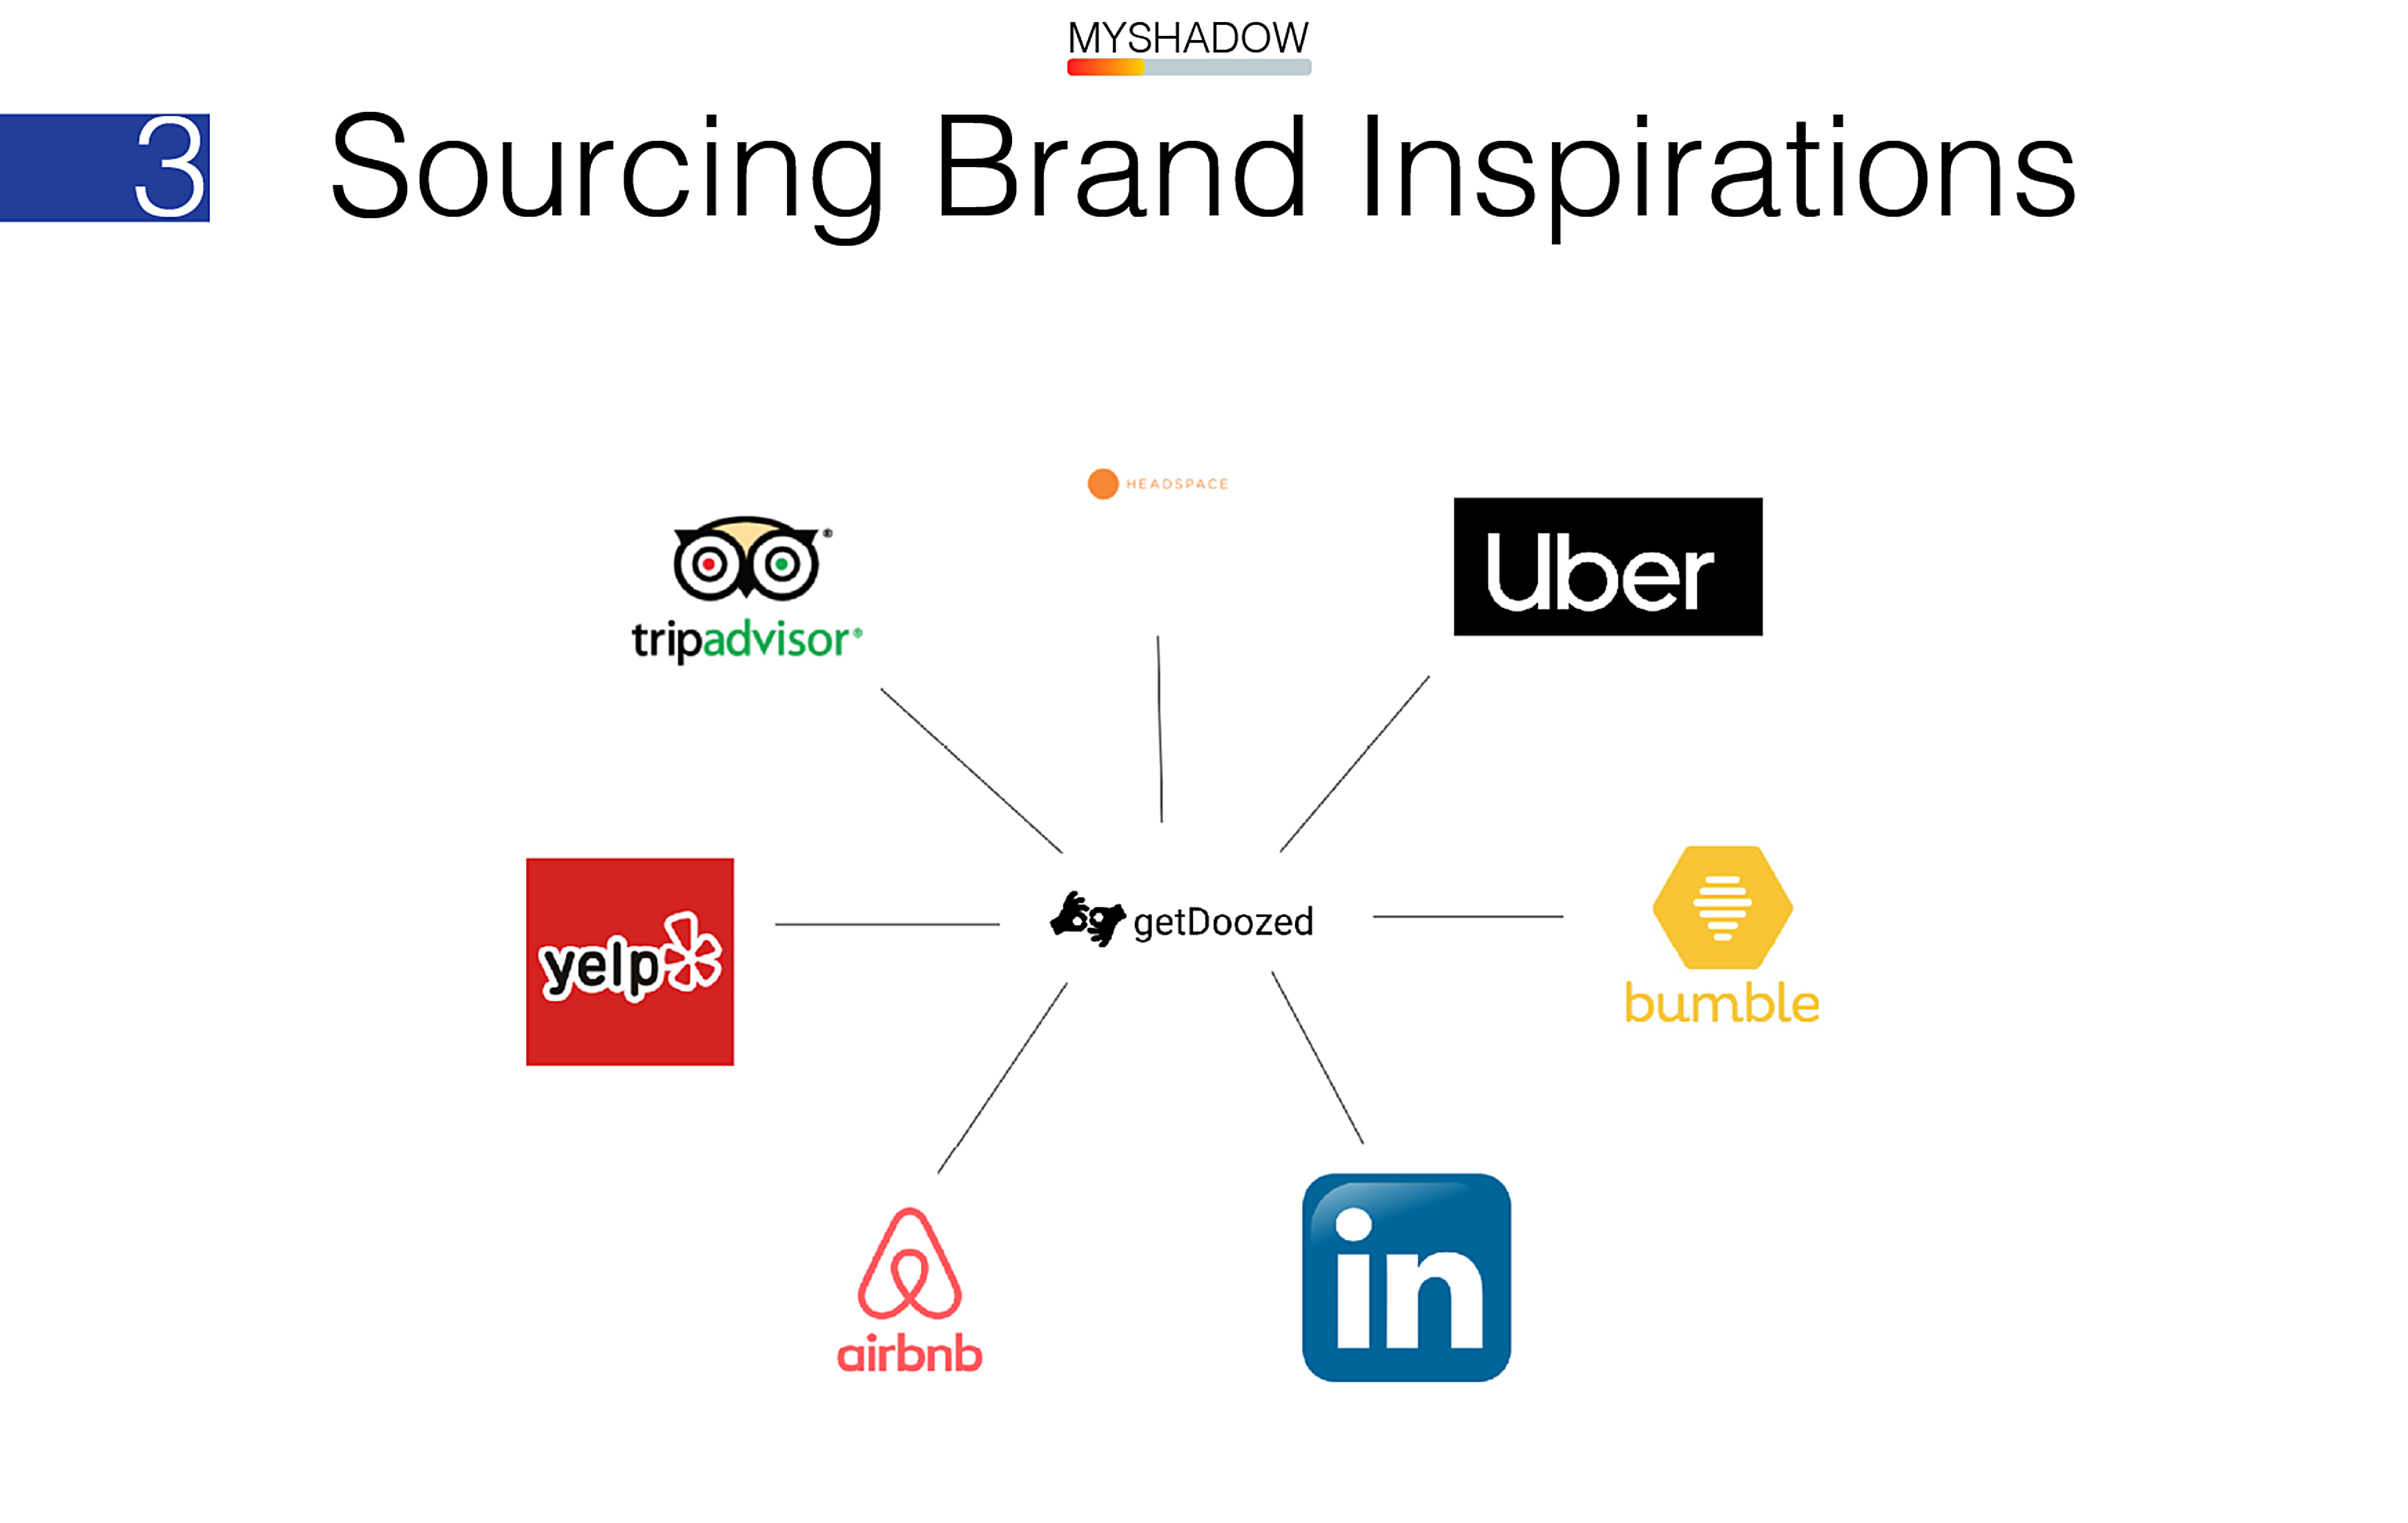 doing research and ideation to build out a landscape of competing and analogous brands to help us define the style, identity, and design execution of myshadow